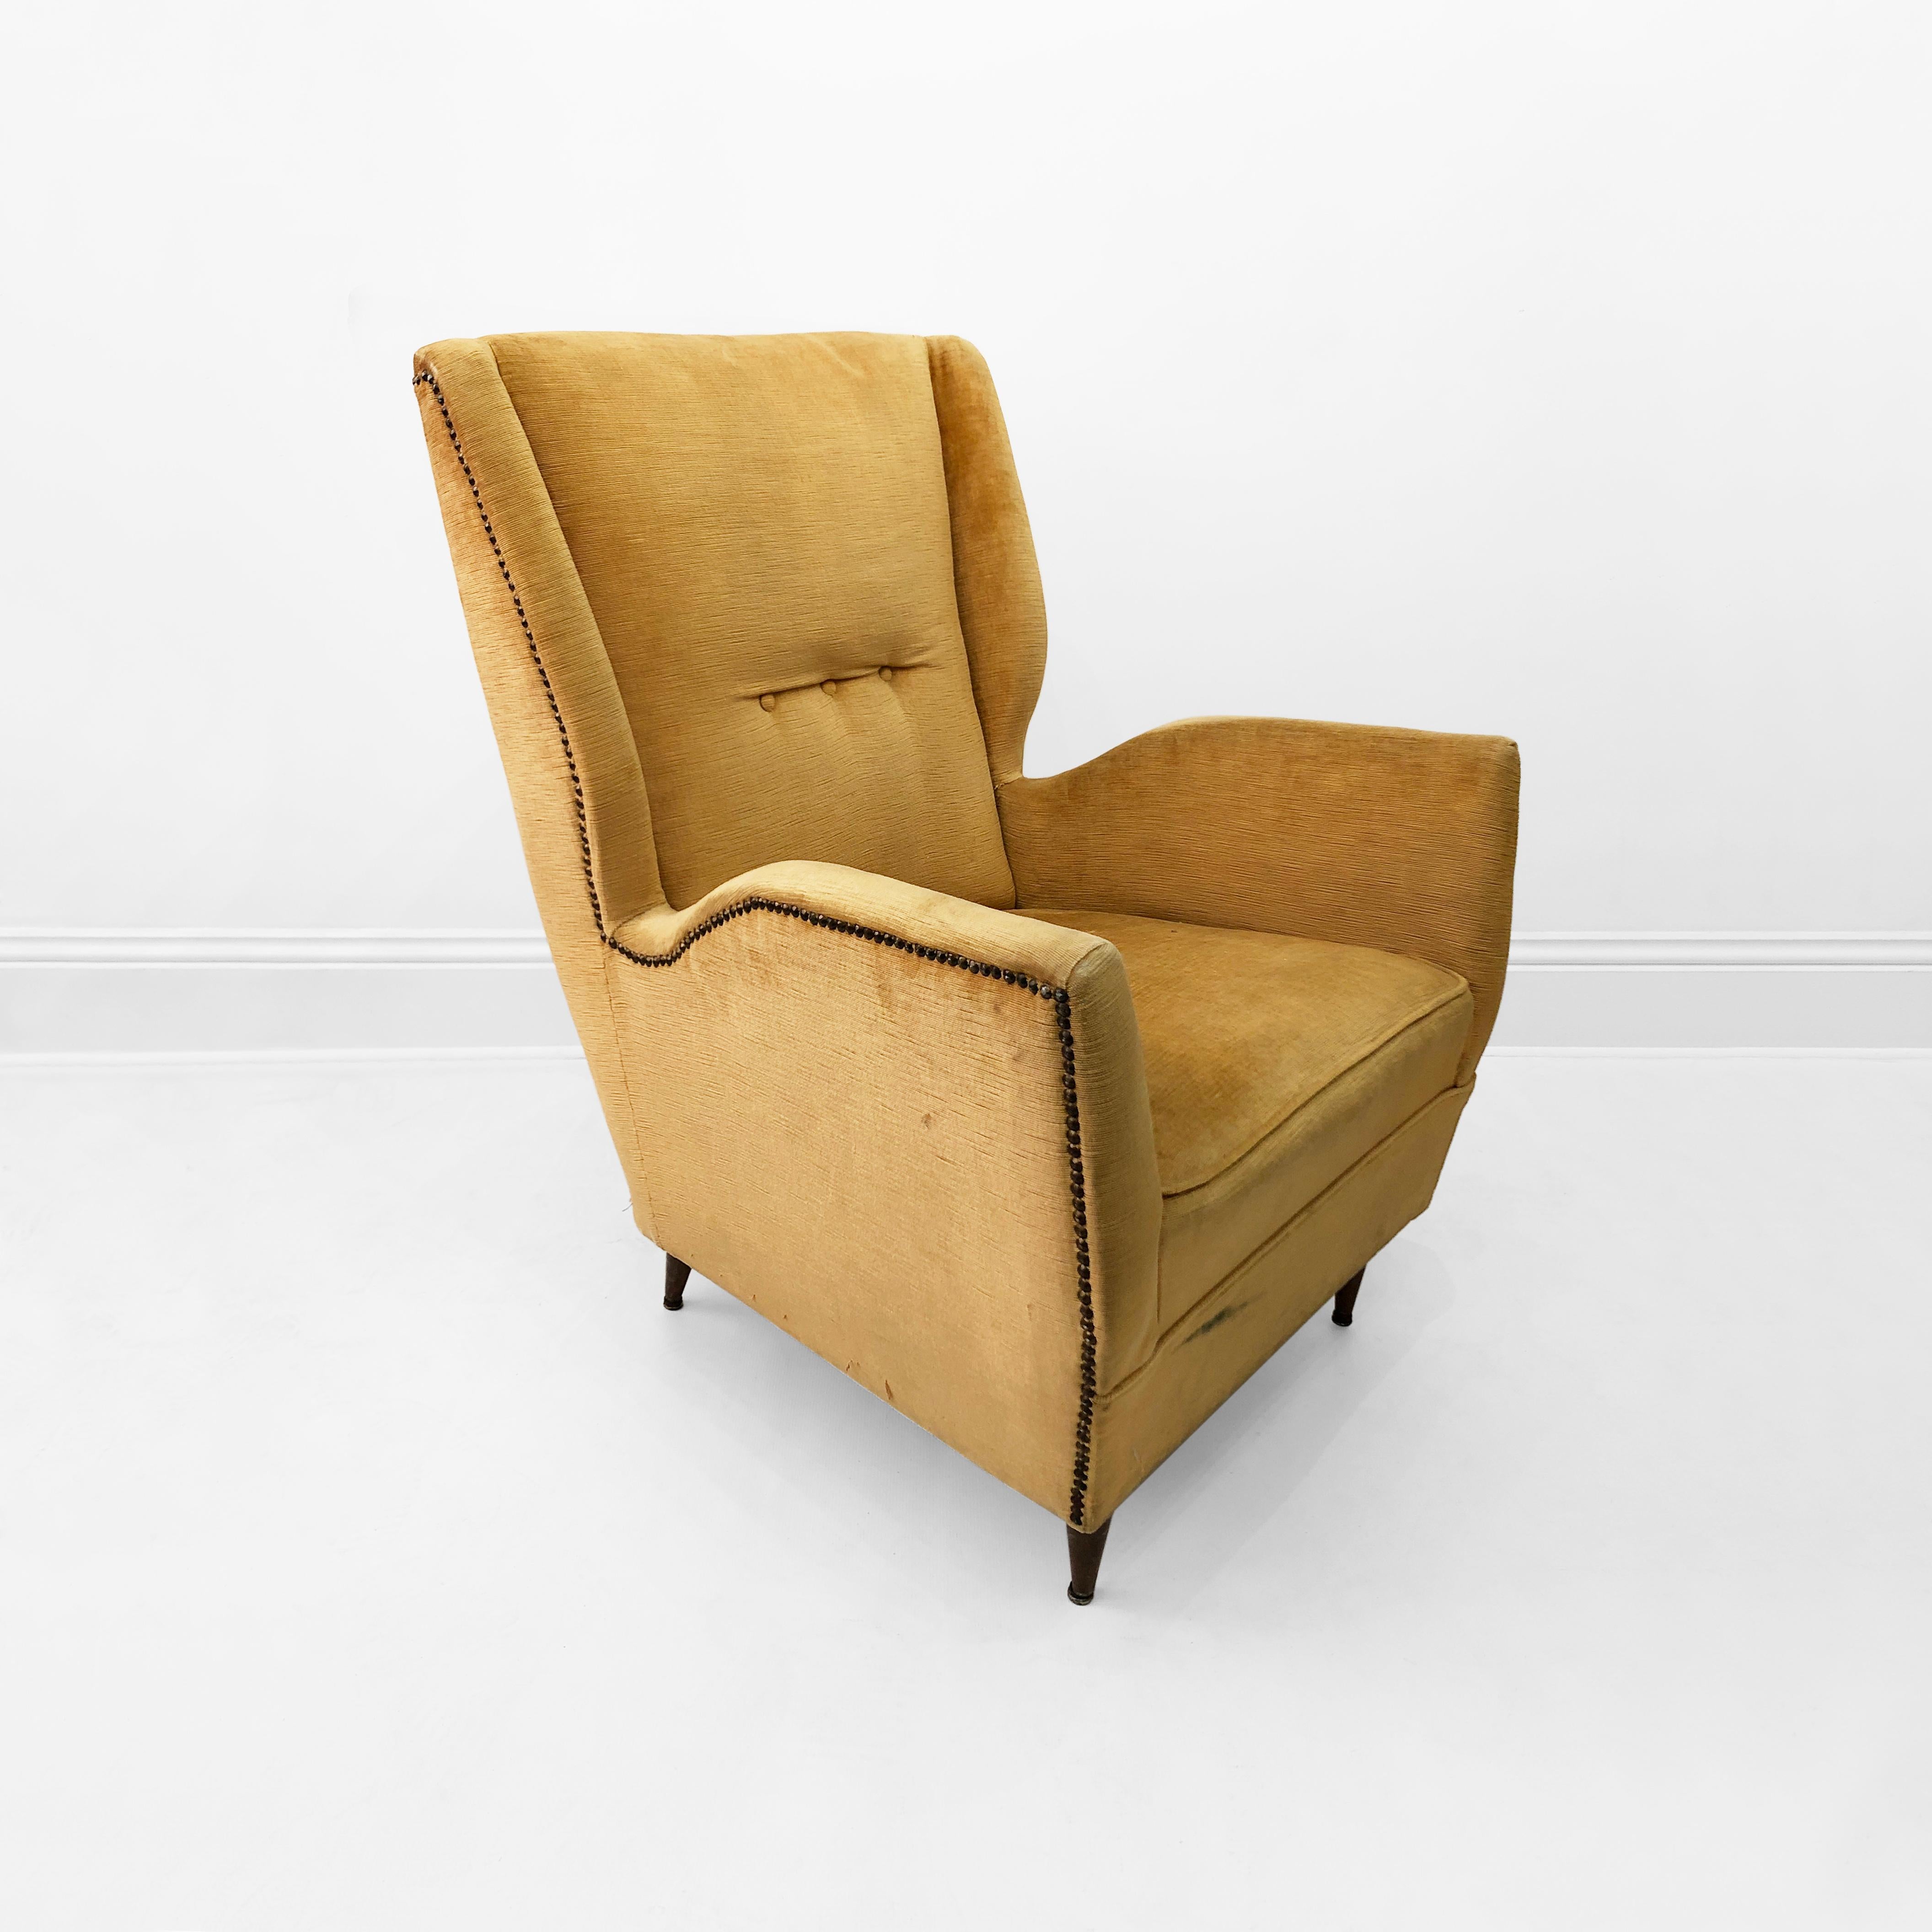 A gorgeous and important wingback armchair from the design master Gio Ponti for I.S.A. Bergamo, designed in the 1940s and produced in the 1950s Italy, an innovative sleek design of mid-century modernism. This Classic design armchair by Gio Ponti